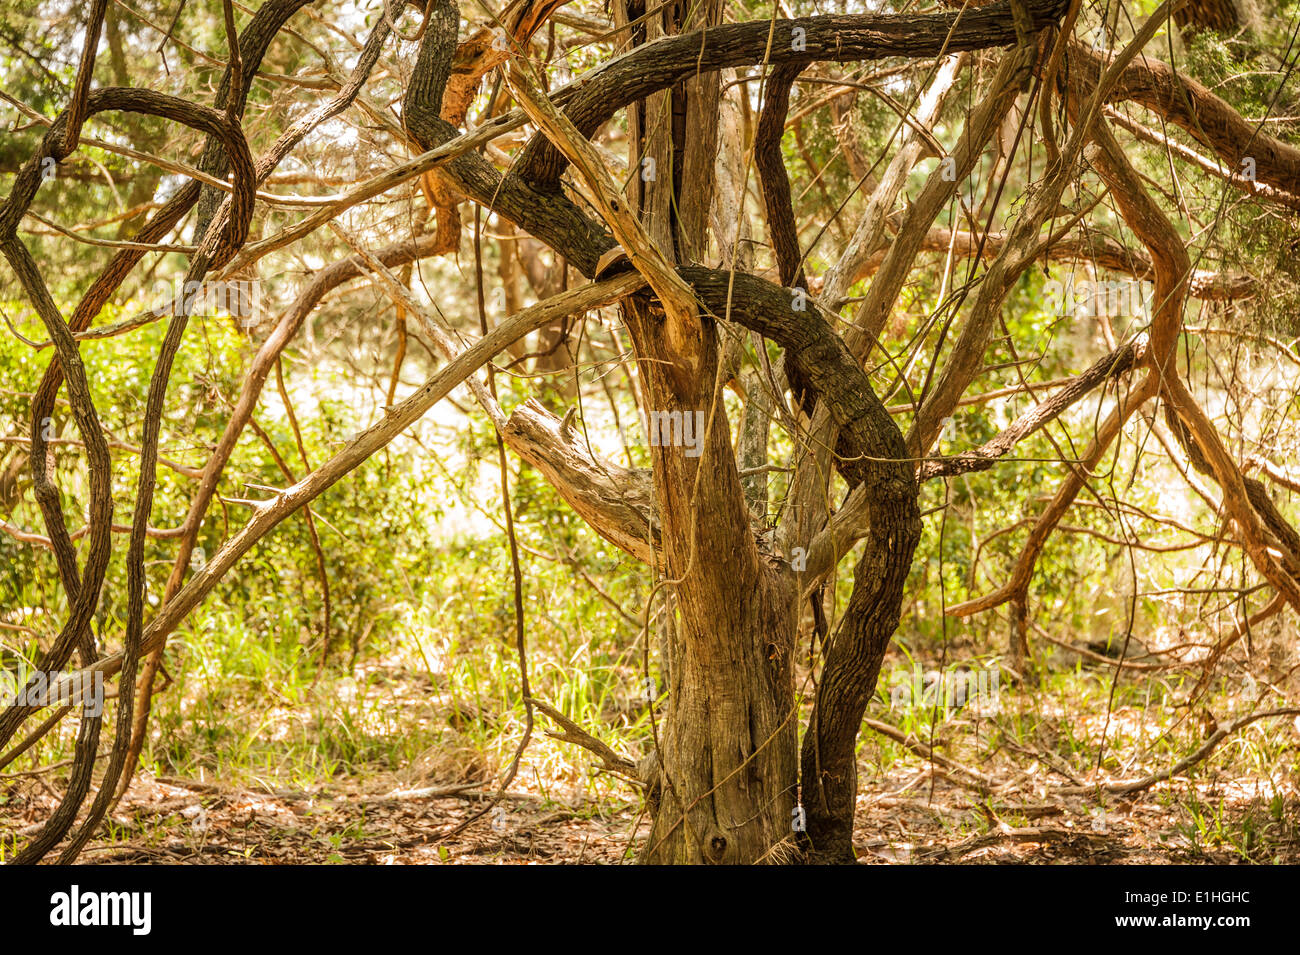 Twisted vines entangled with tree limbs along a wooded trail at Guana River State Park near St. Augustine and Jacksonville, FL. Stock Photo